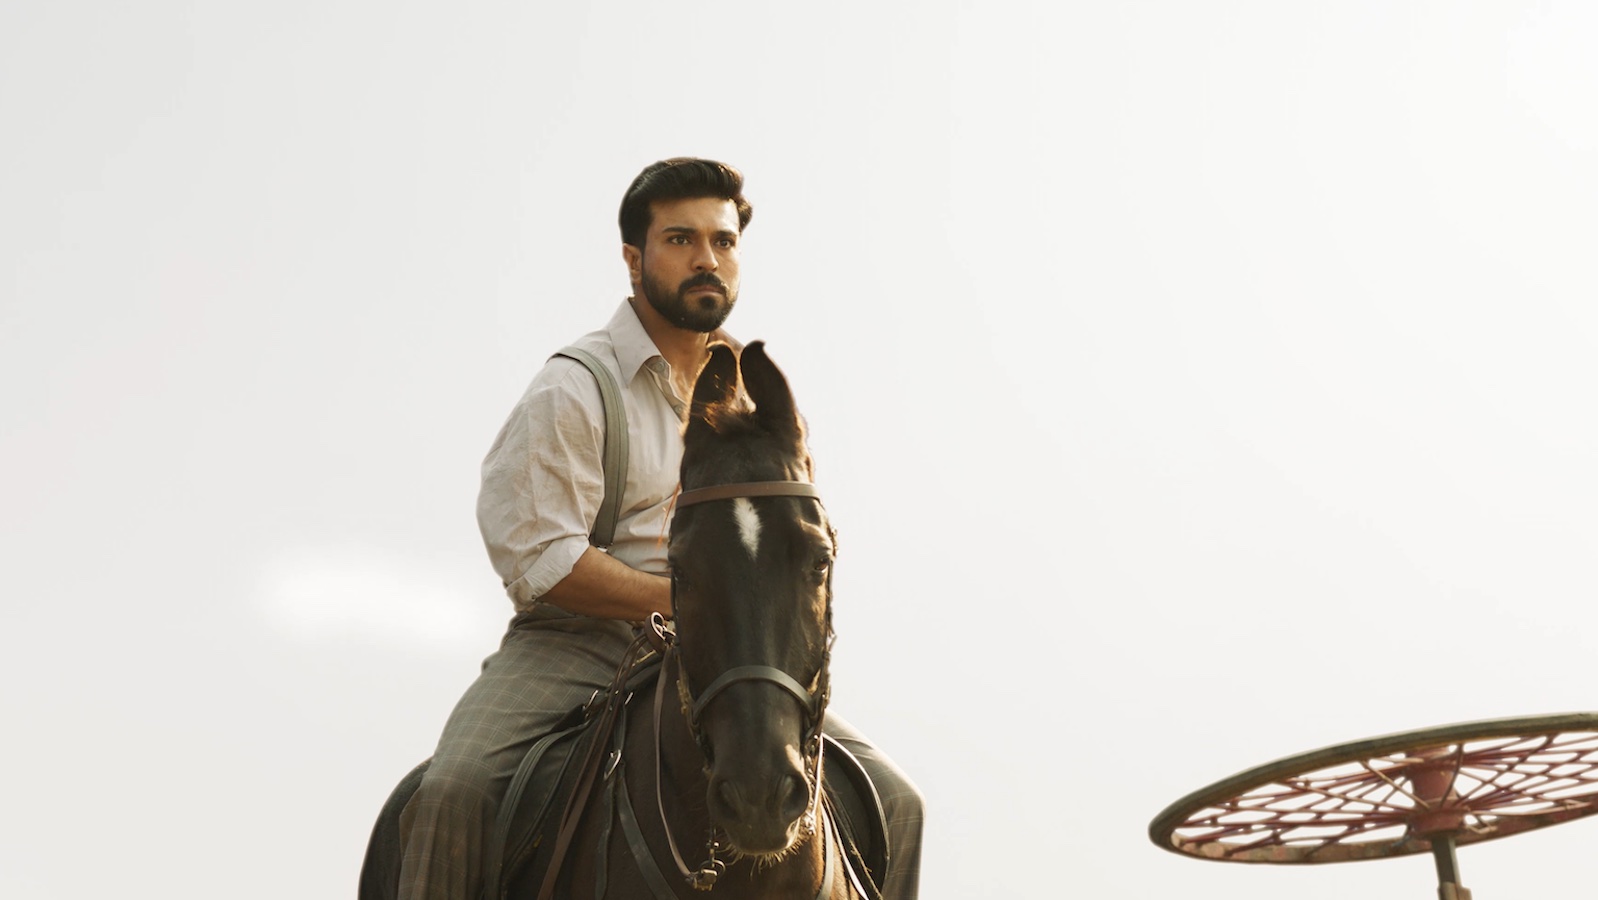 A bearded man in suspenders and a white shirt rides on horseback towards camera